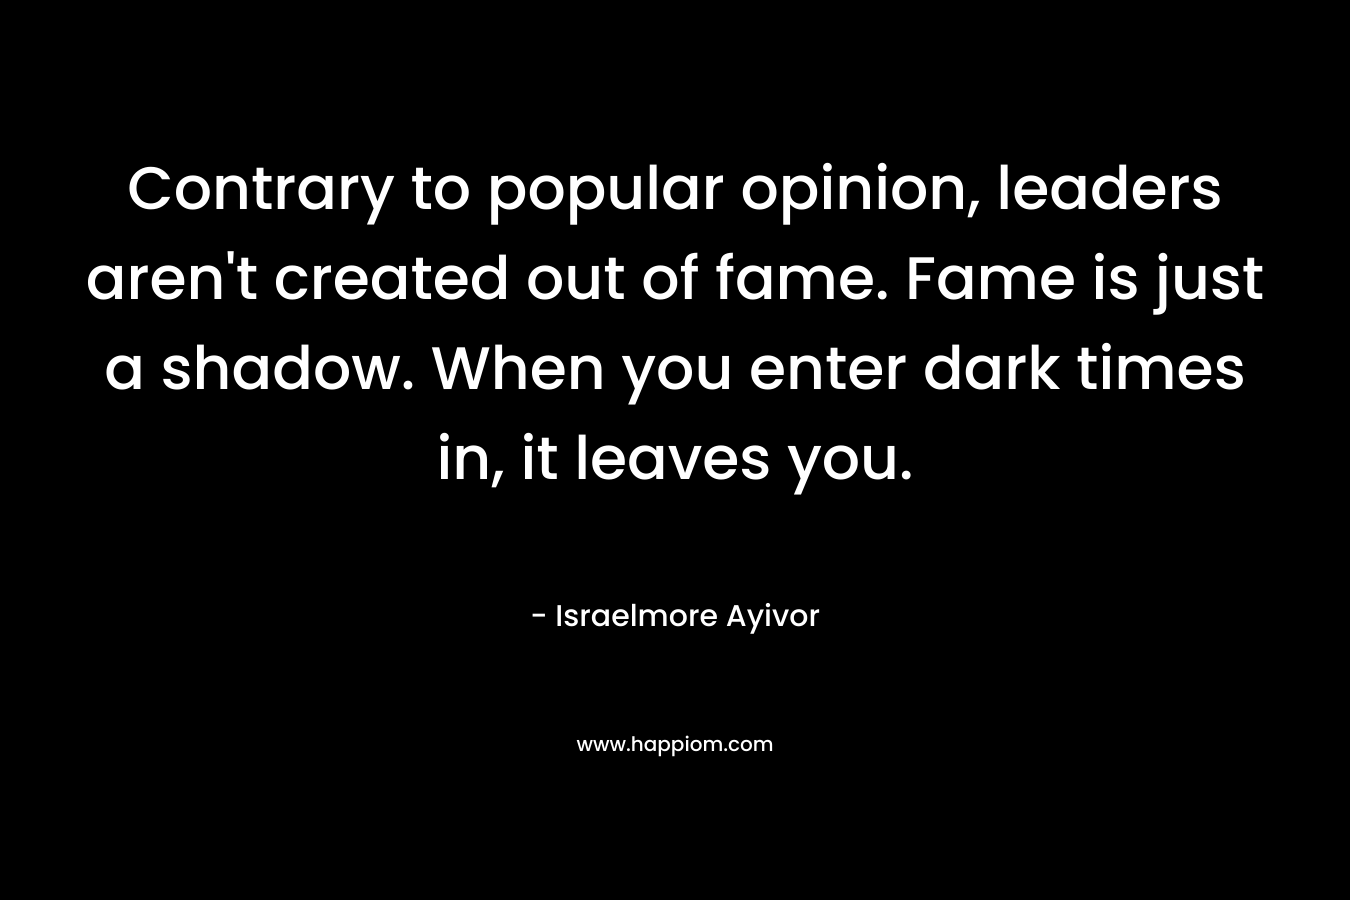 Contrary to popular opinion, leaders aren't created out of fame. Fame is just a shadow. When you enter dark times in, it leaves you.